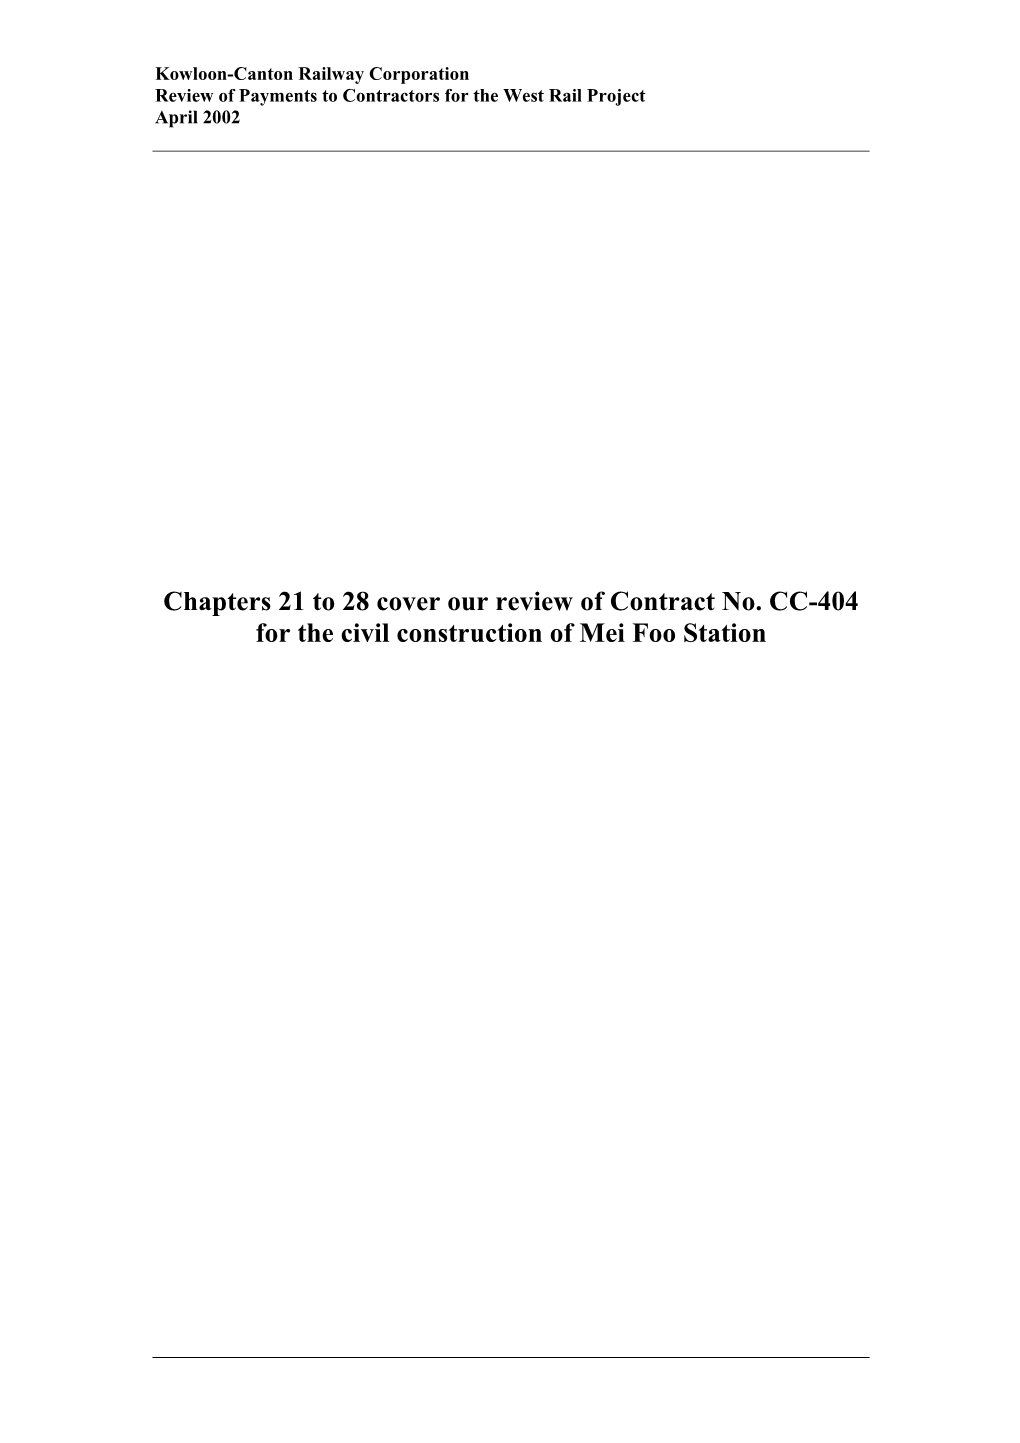 Chapters 21 to 28 Cover Our Review of Contract No. CC-404 for the Civil